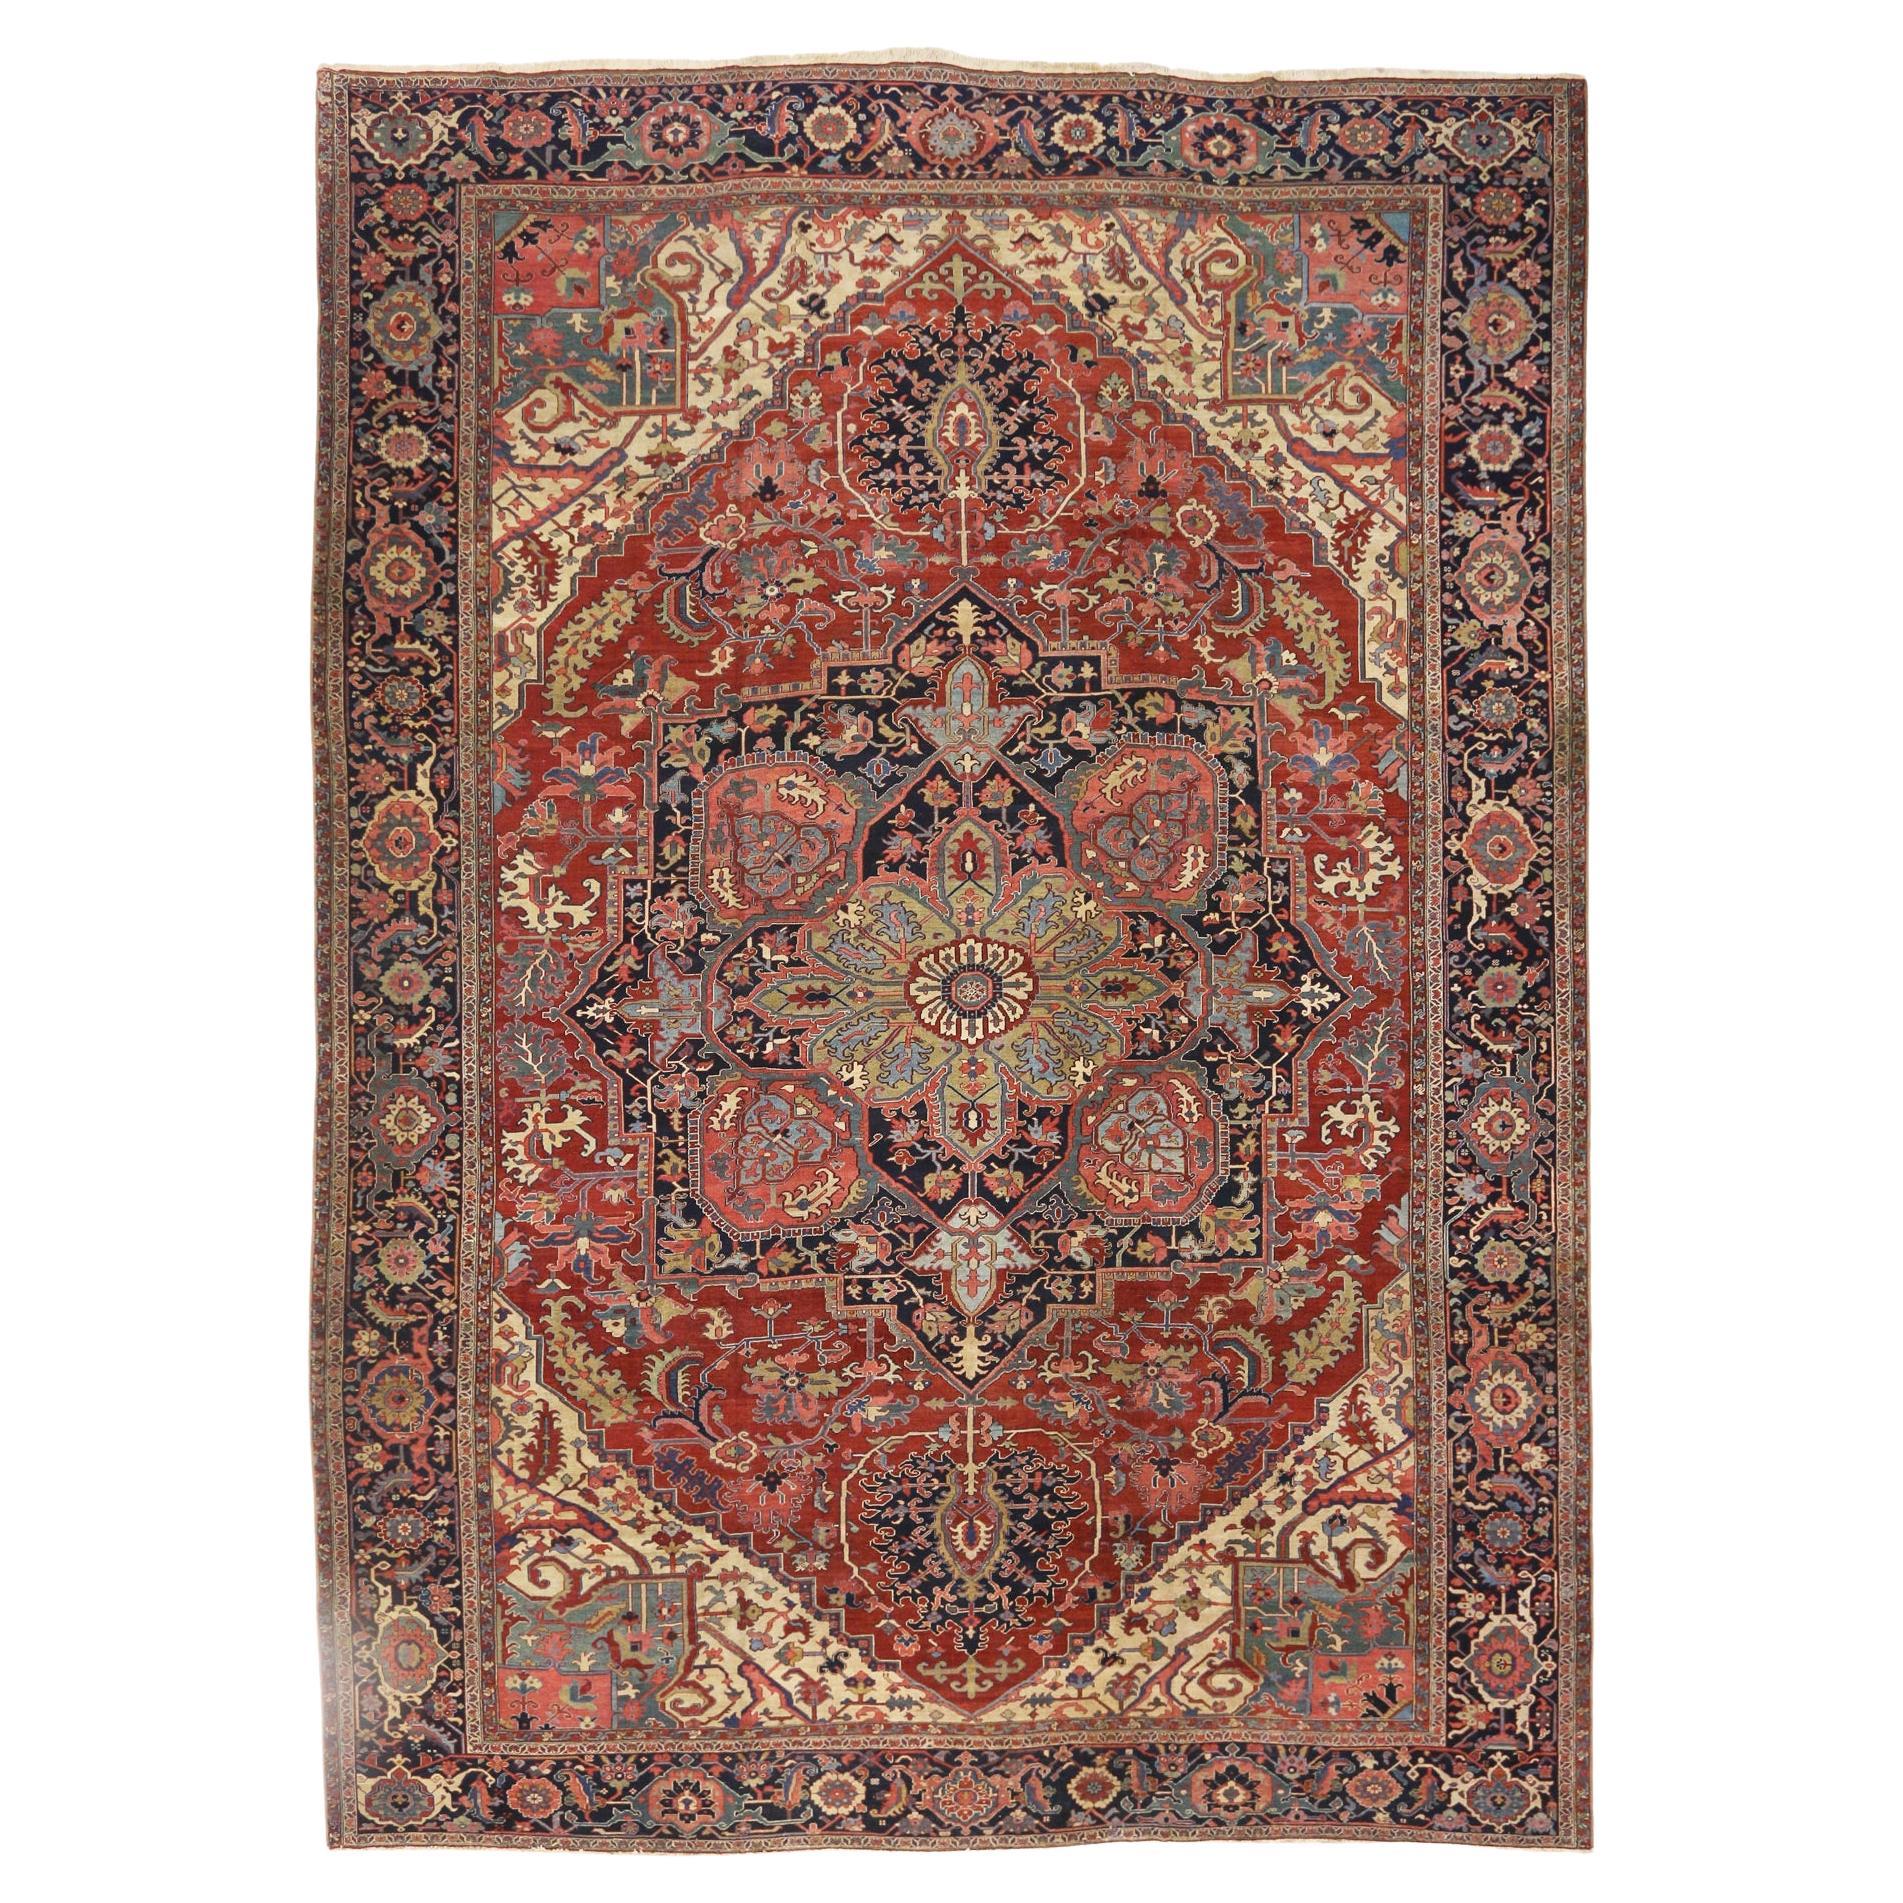 Oversized Antique Persian Serapi Rug with Modern Style, Hotel Lobby Size Carpet